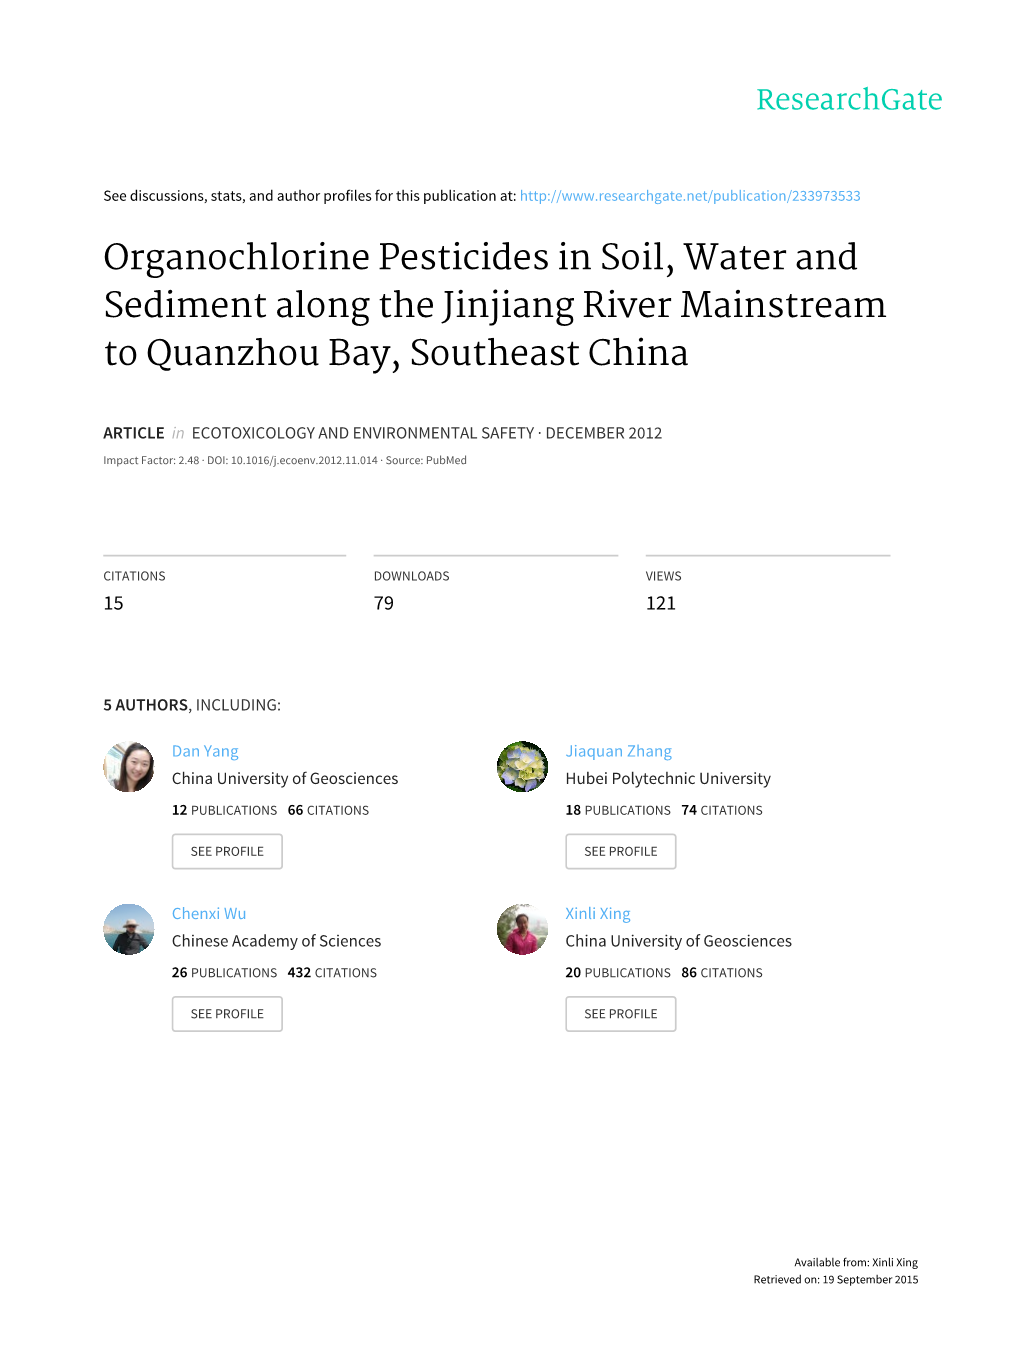 Organochlorine Pesticides in Soil, Water and Sediment Along the Jinjiang River Mainstream to Quanzhou Bay, Southeast China